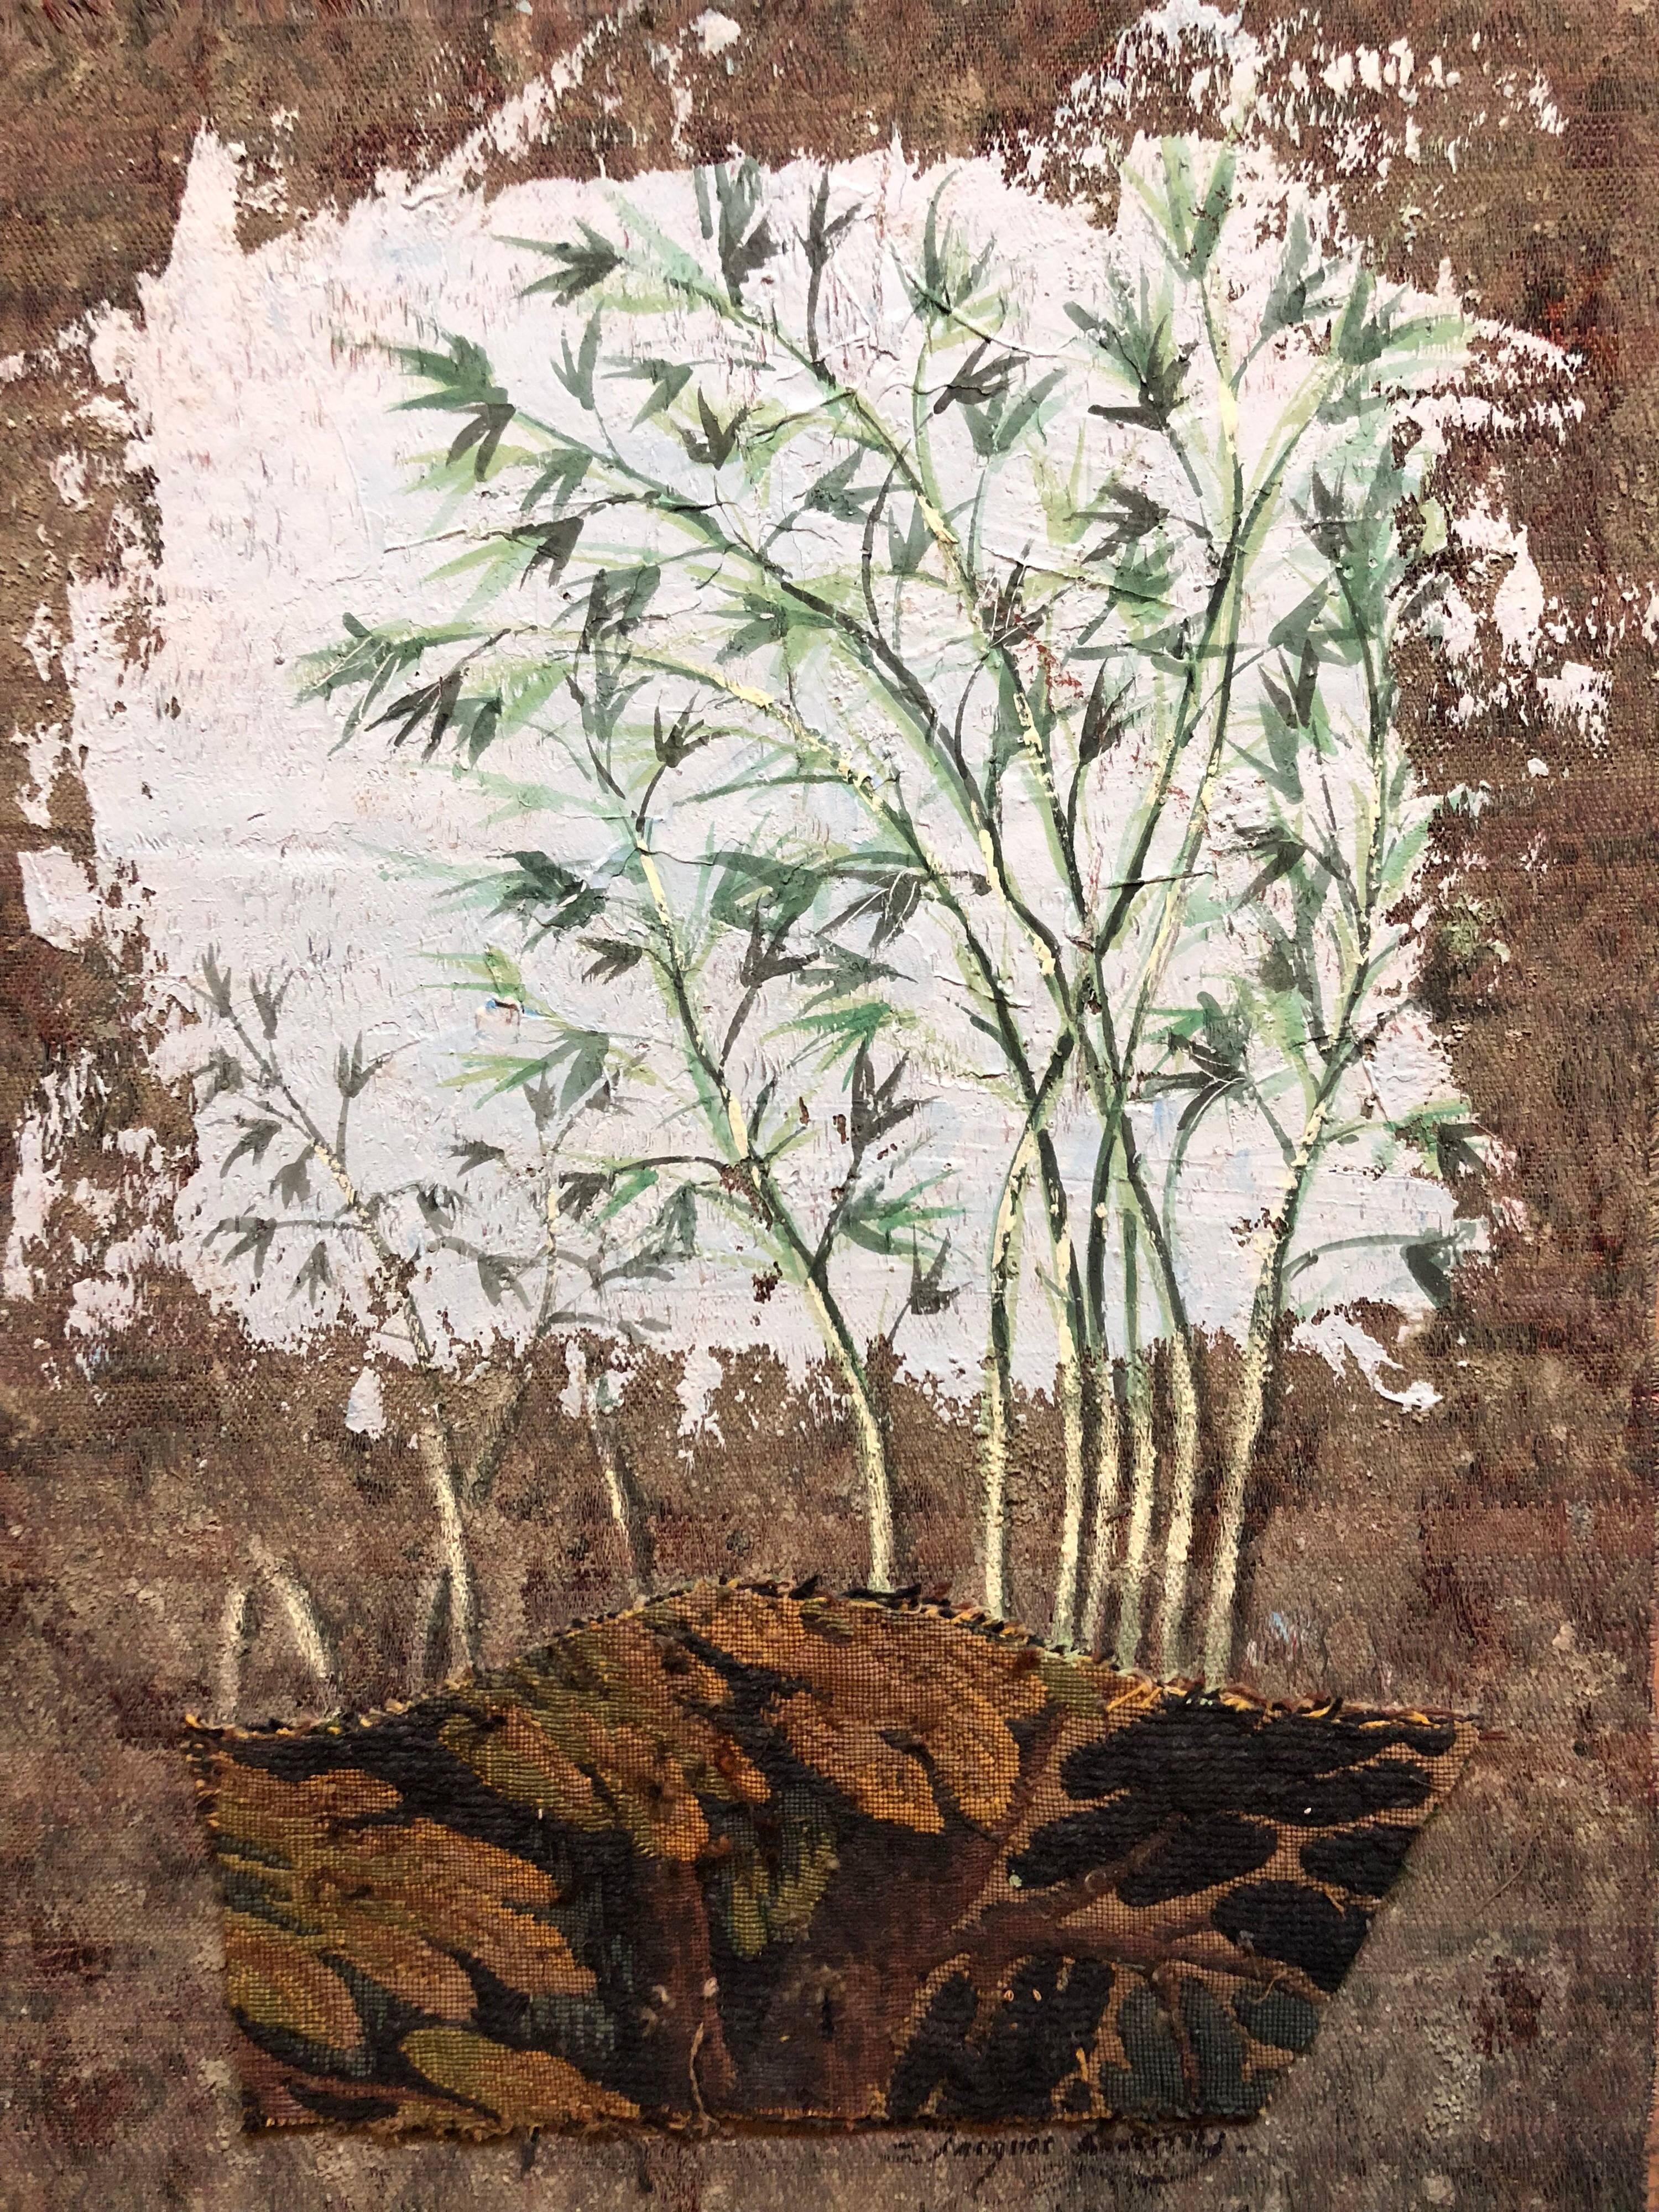 Mixed Media Floral Oil Painting Collage Bouquet of Bamboo Grass with Flowers - Contemporary Mixed Media Art by Jacques Lamy